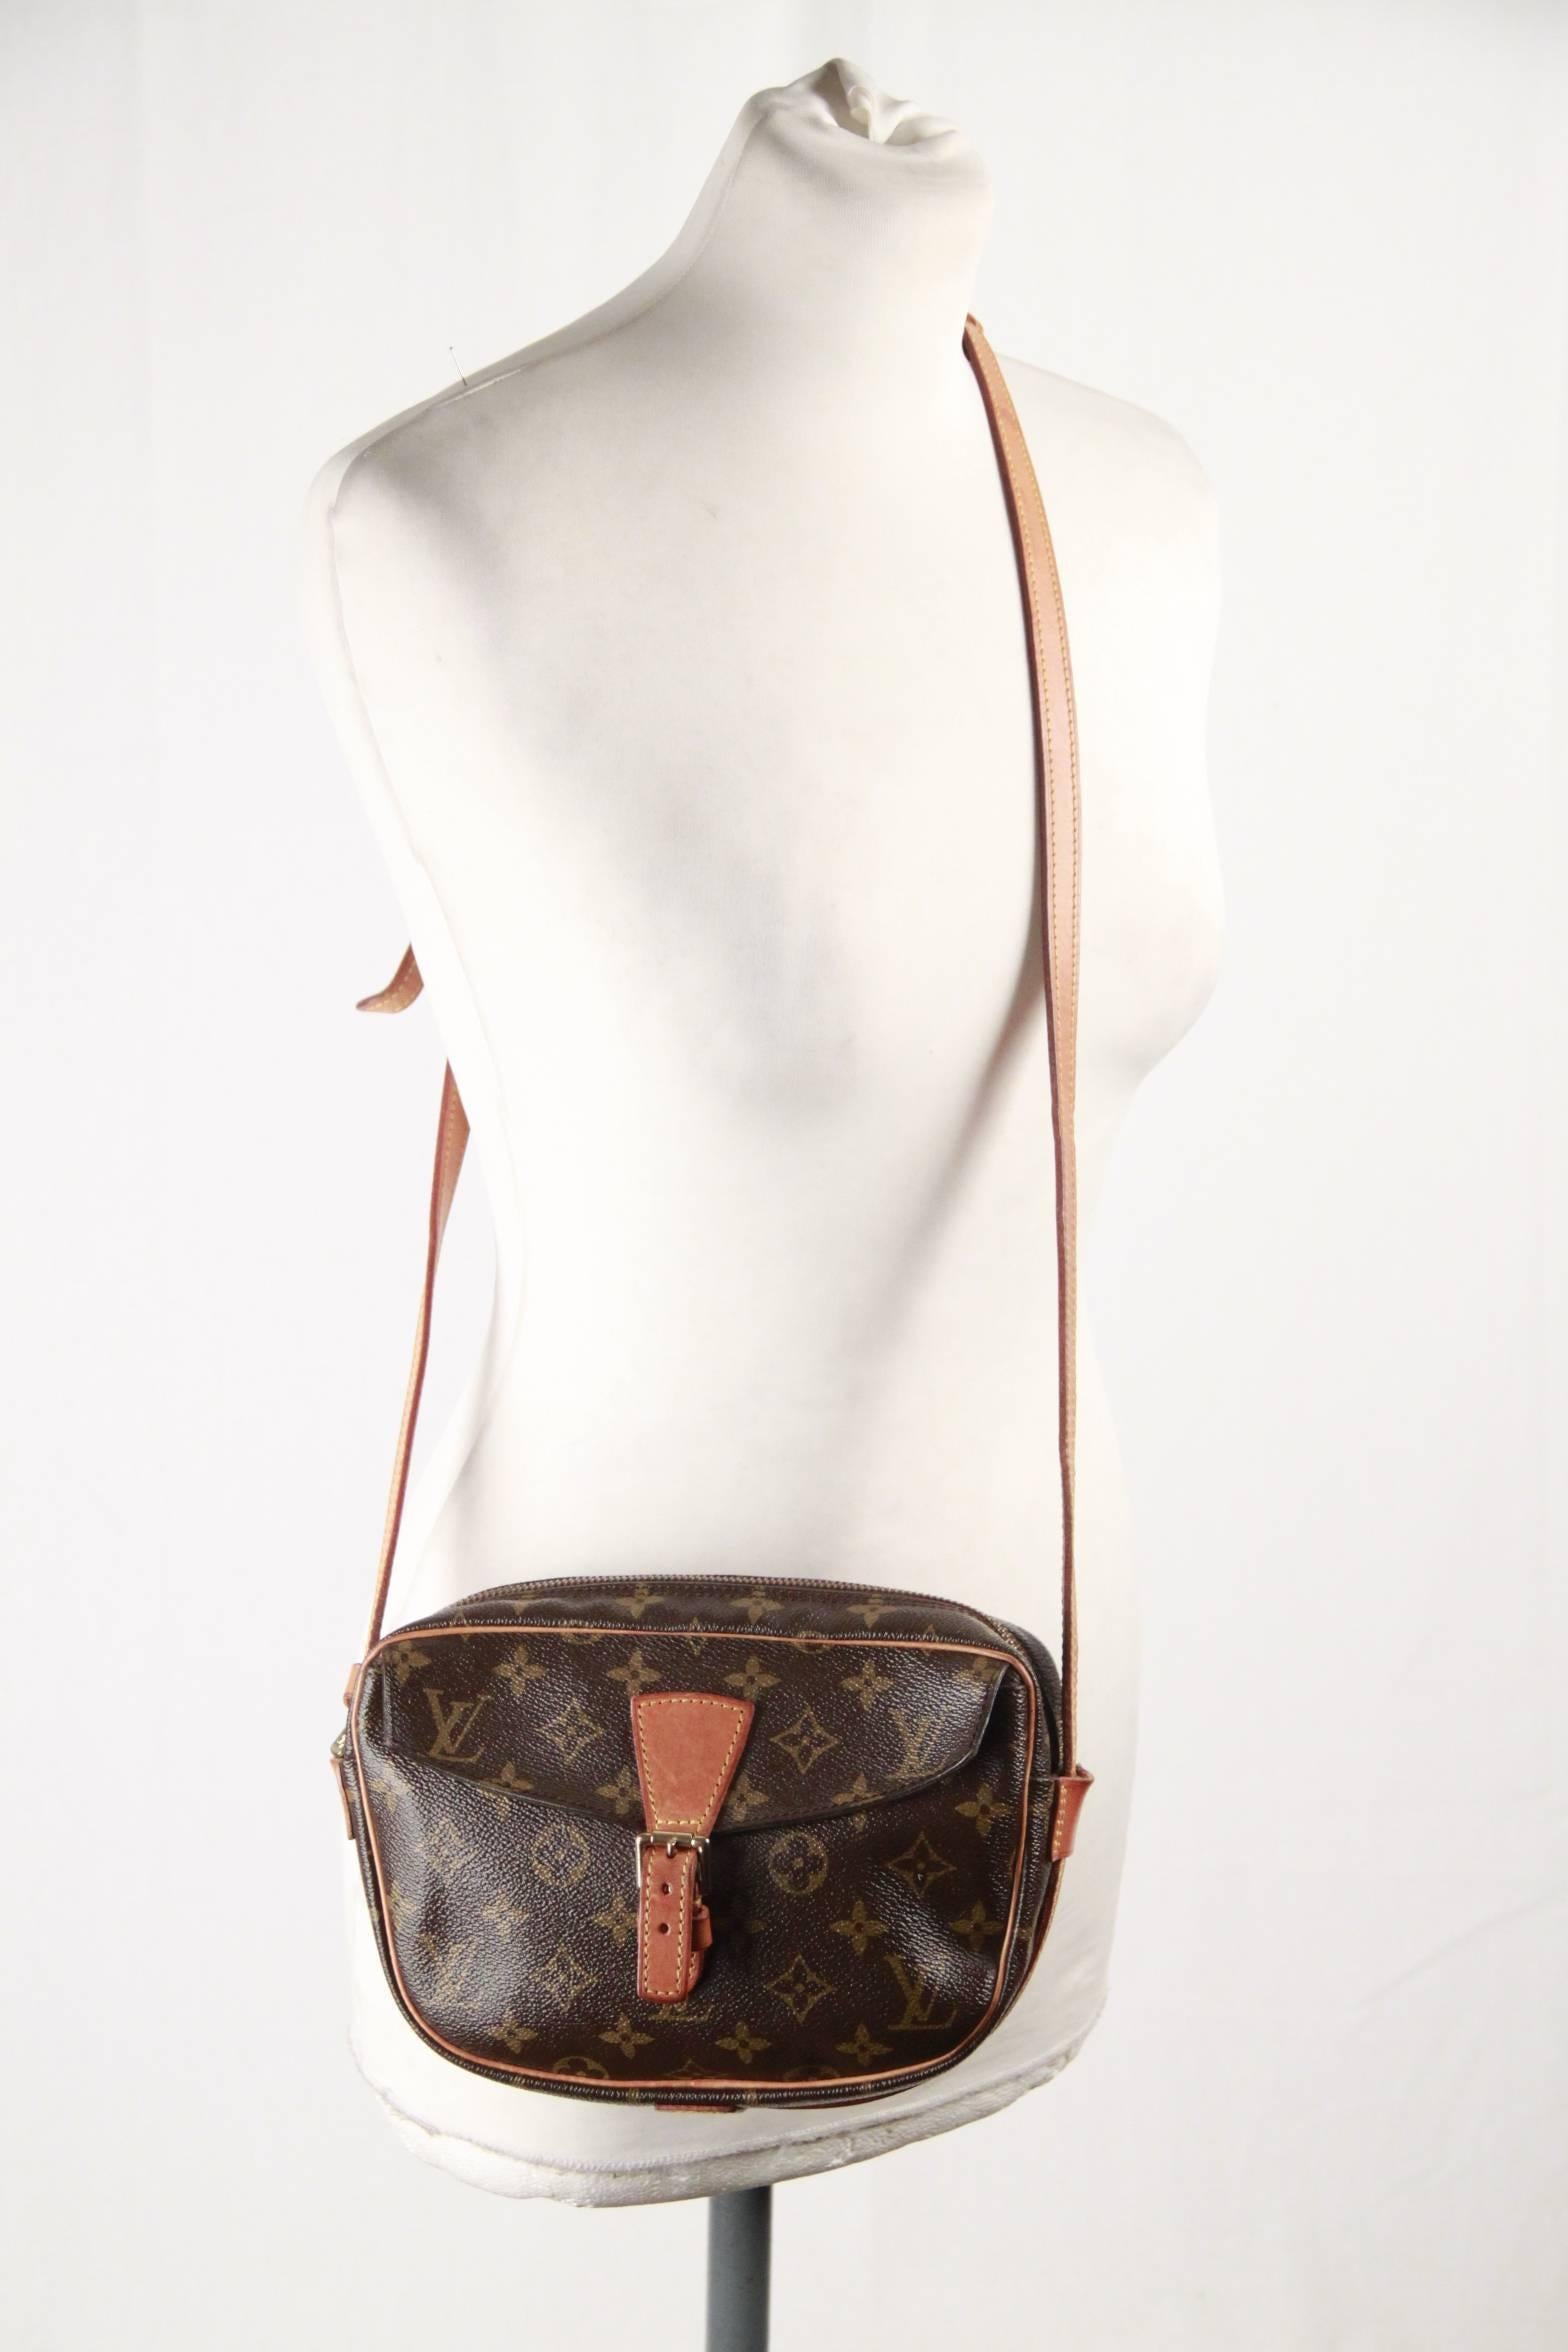 - Louis Vuitton Monogram Canvas Jeune Fille Messenger bag 
- Sleek shape and an adjustable long shoulder strap 
- Top is secured with a zipper 
- 1 flap pocket with buckle detailing on the front
- 1 open pocket on the back
- 1 brown cross-grain